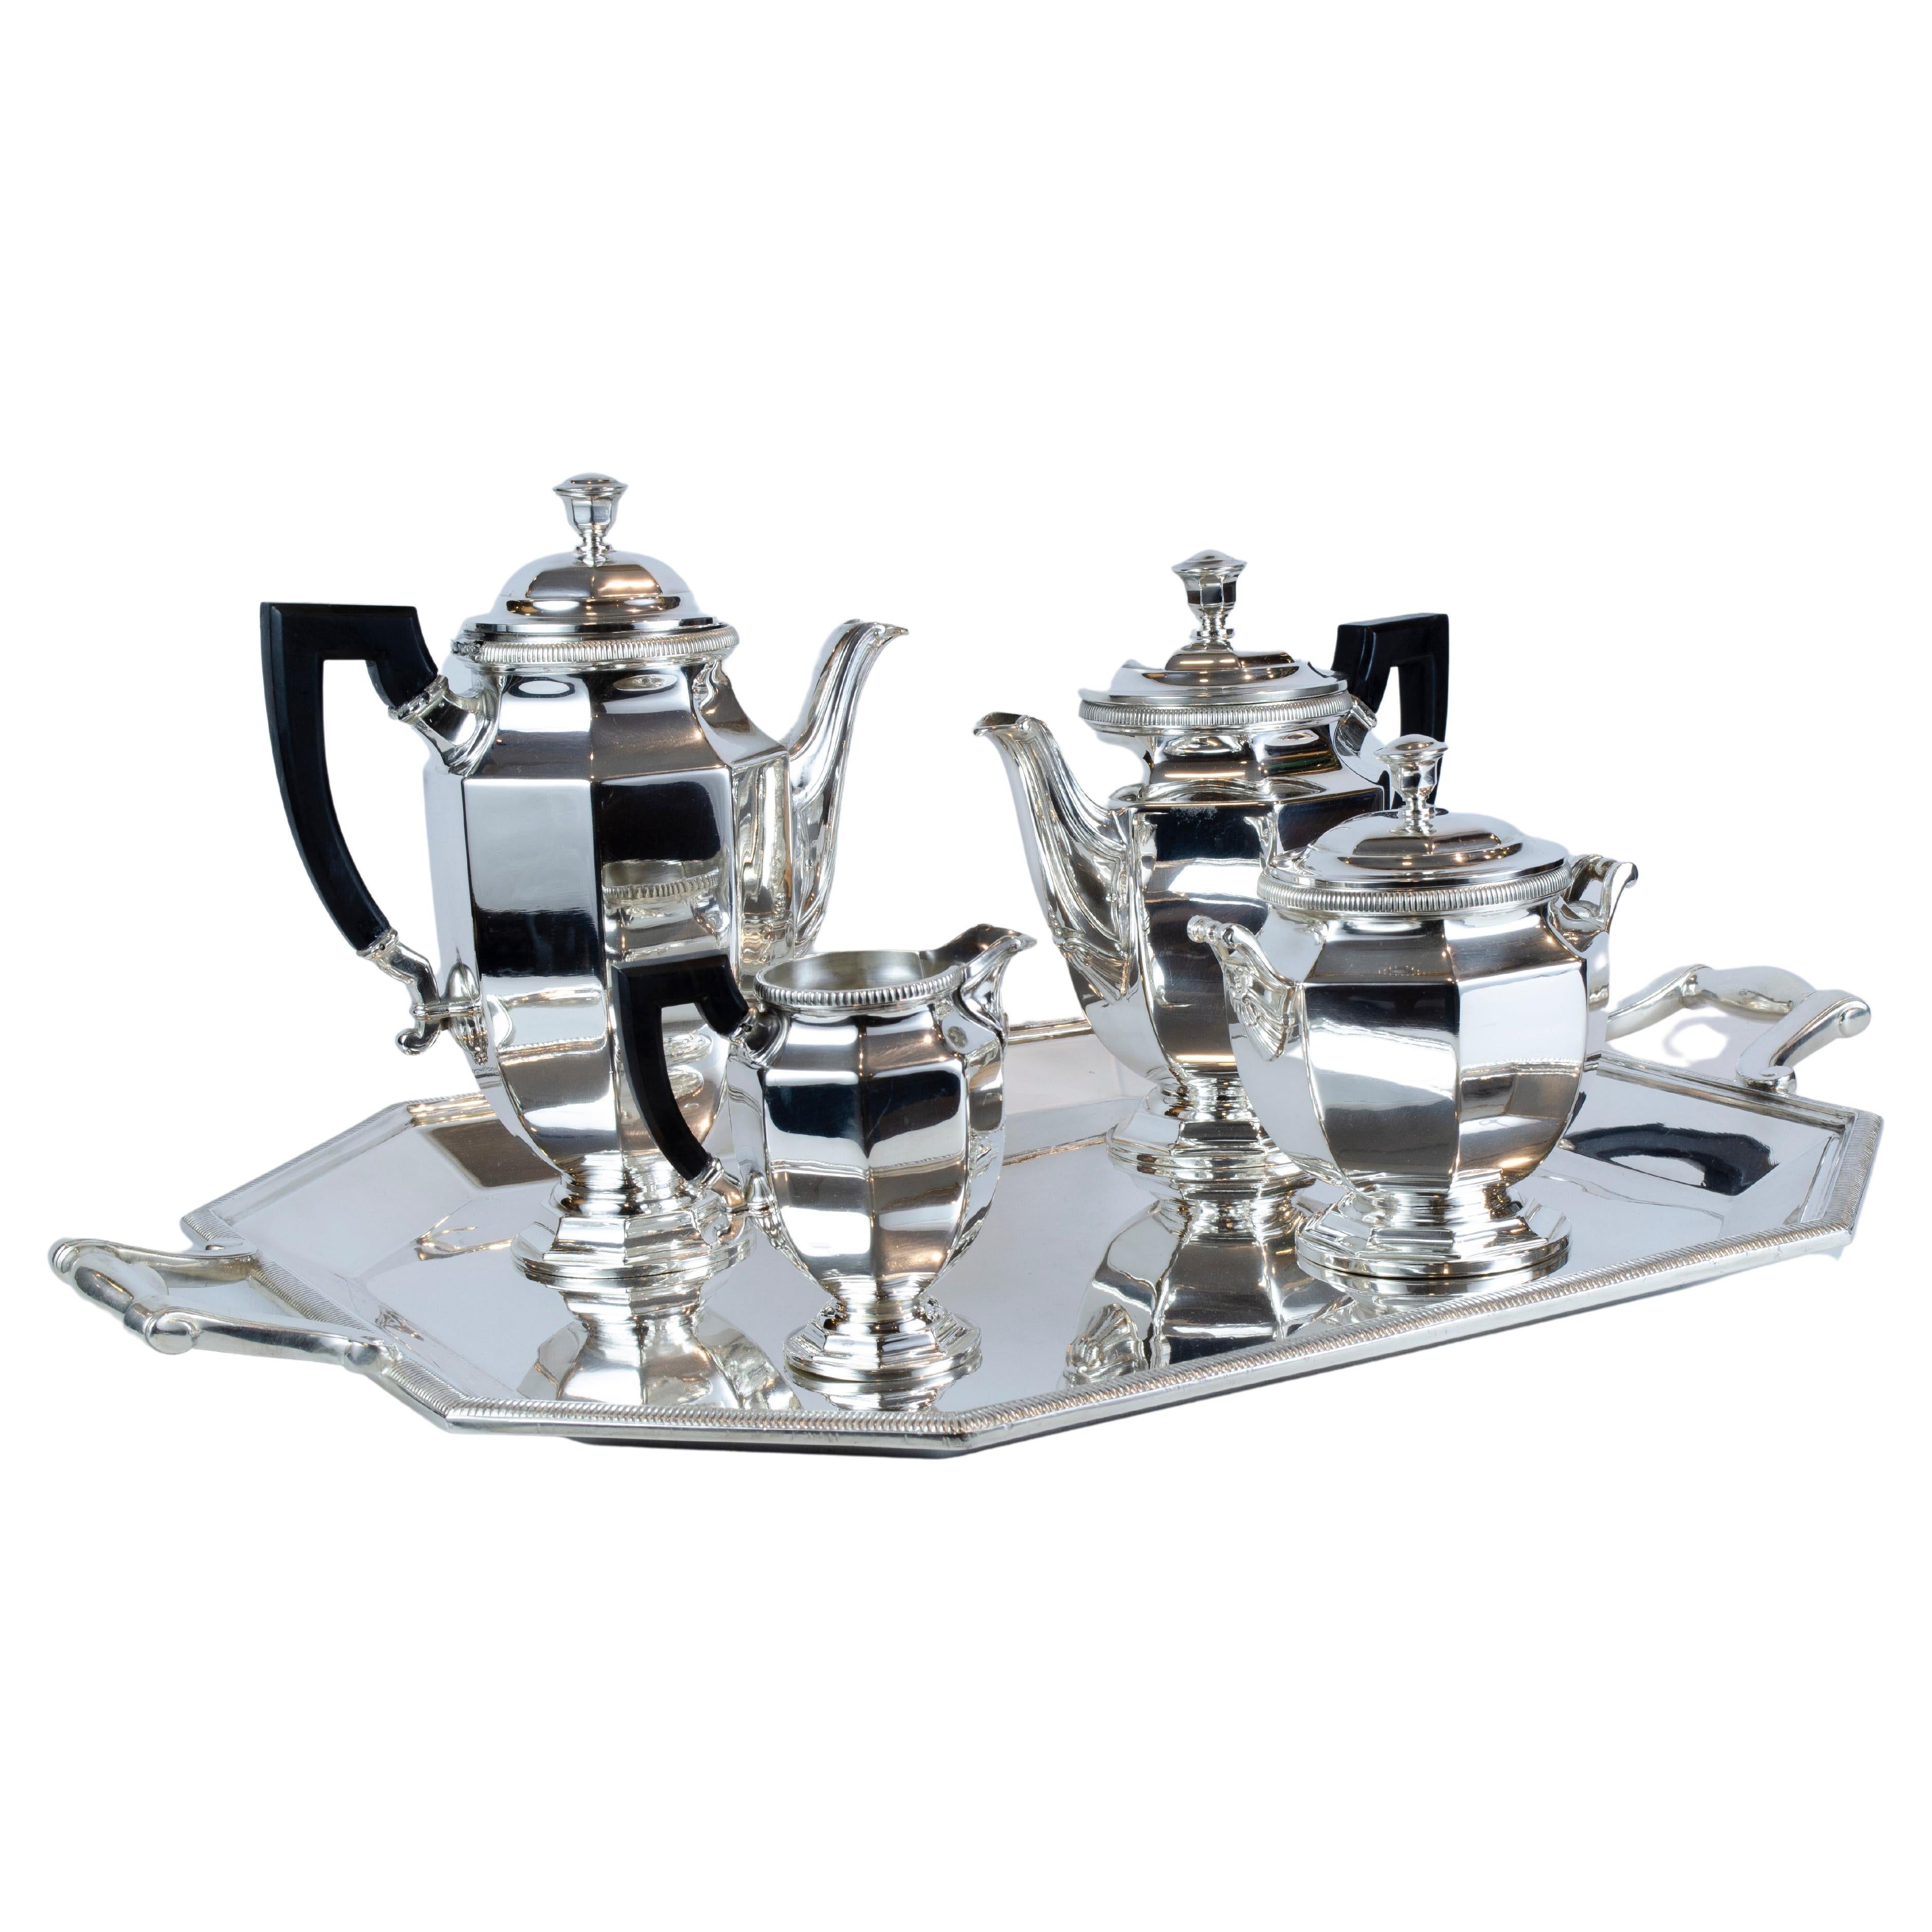 Christofle Tea and Coffee Service with Tray